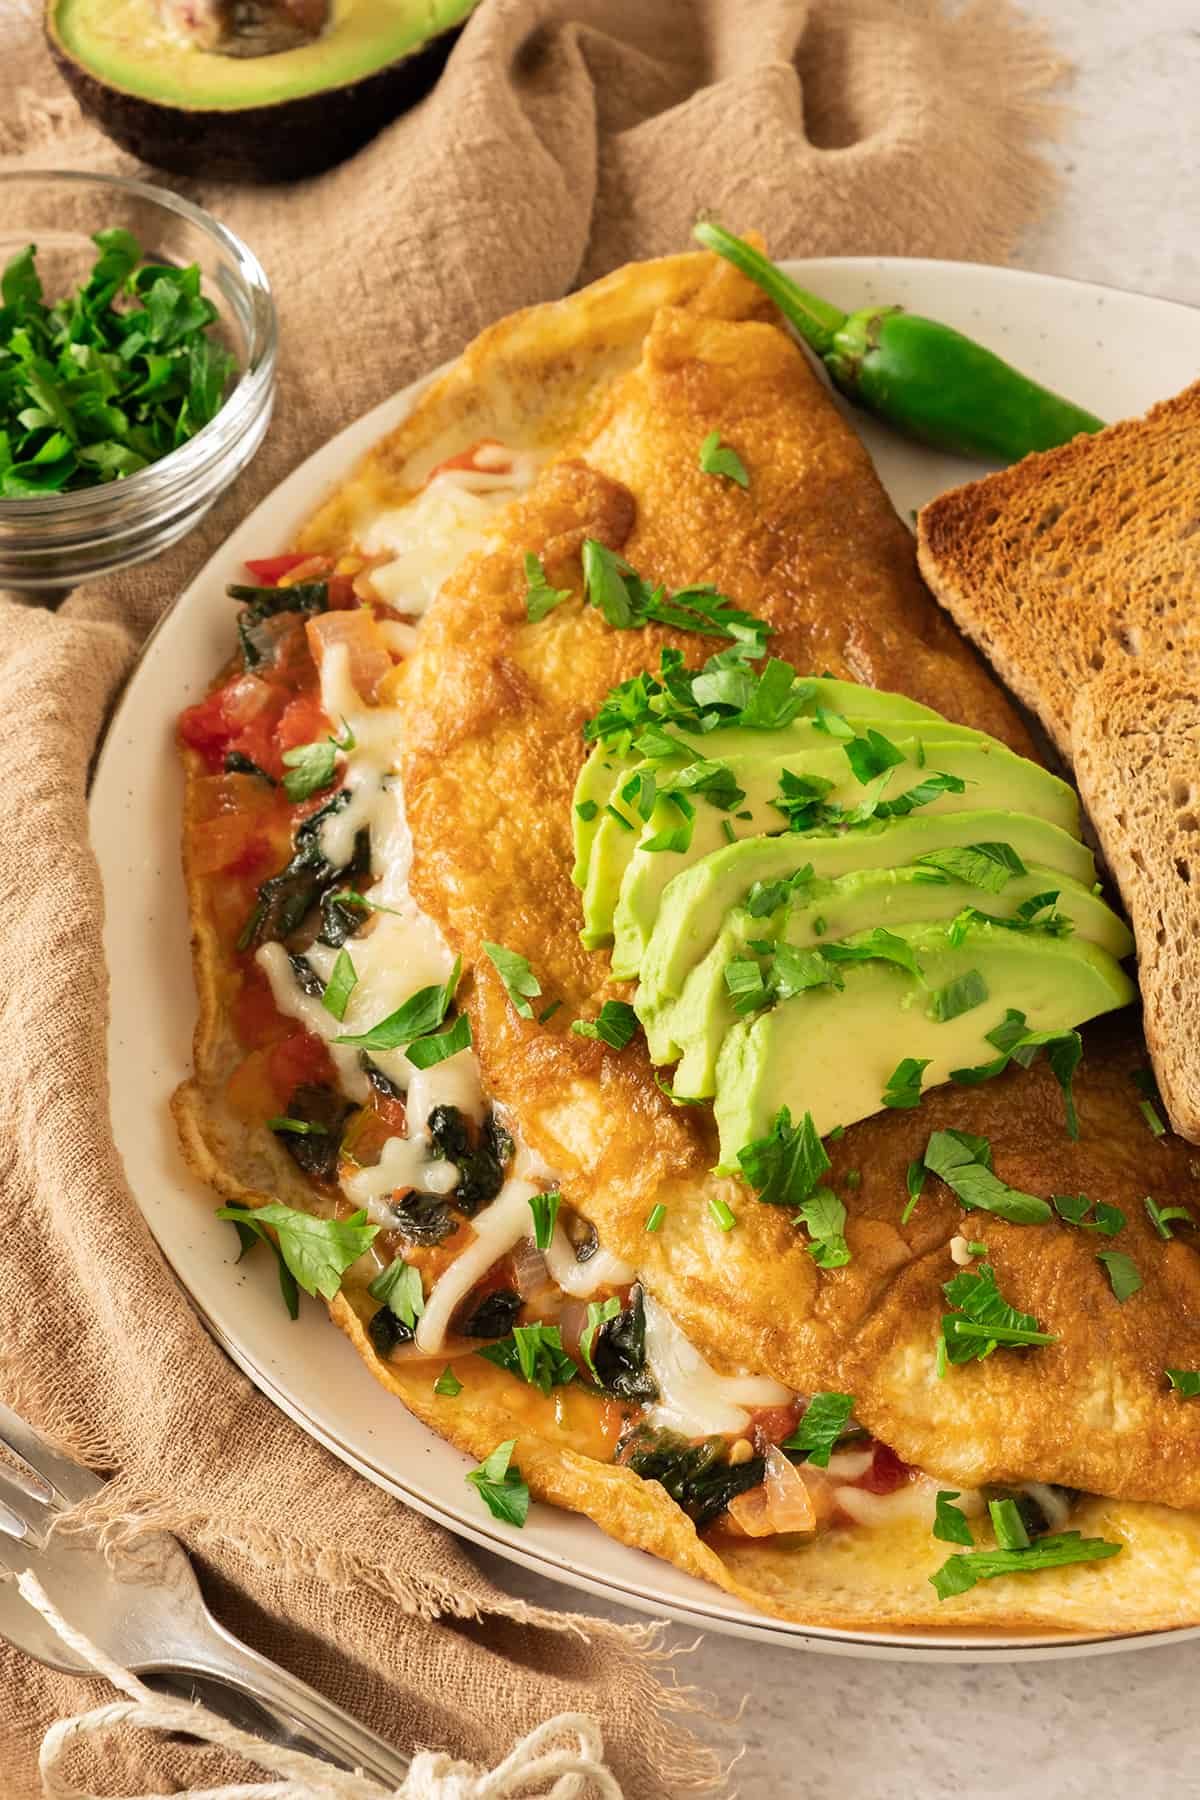 A California Omelette served on a white plate and topped with avocado slices and chopped cilantro.